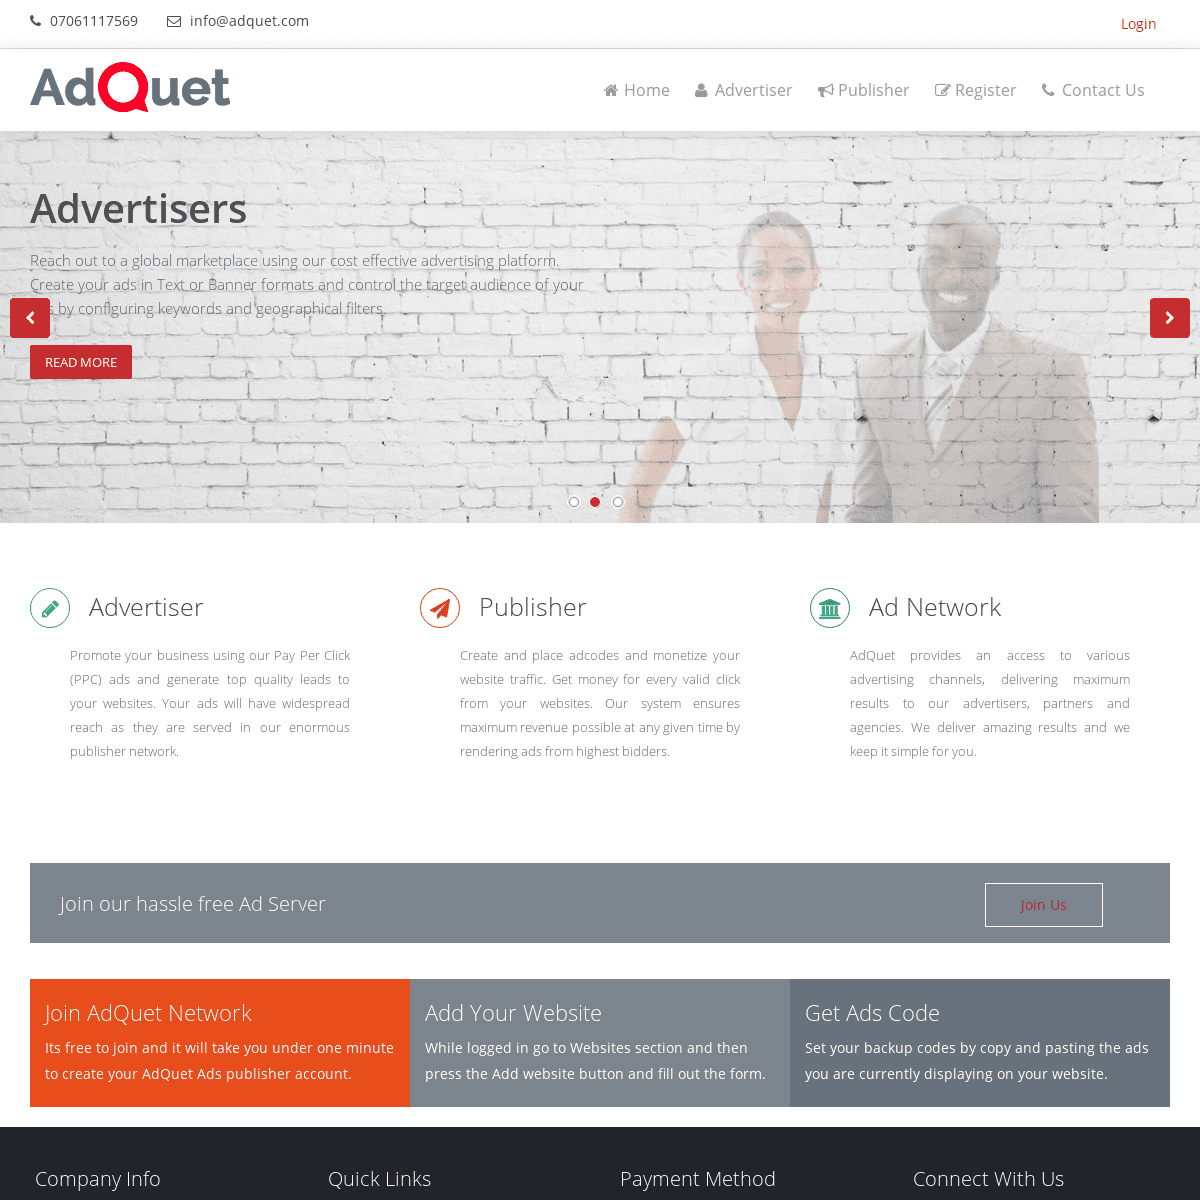 A complete backup of adquet.com